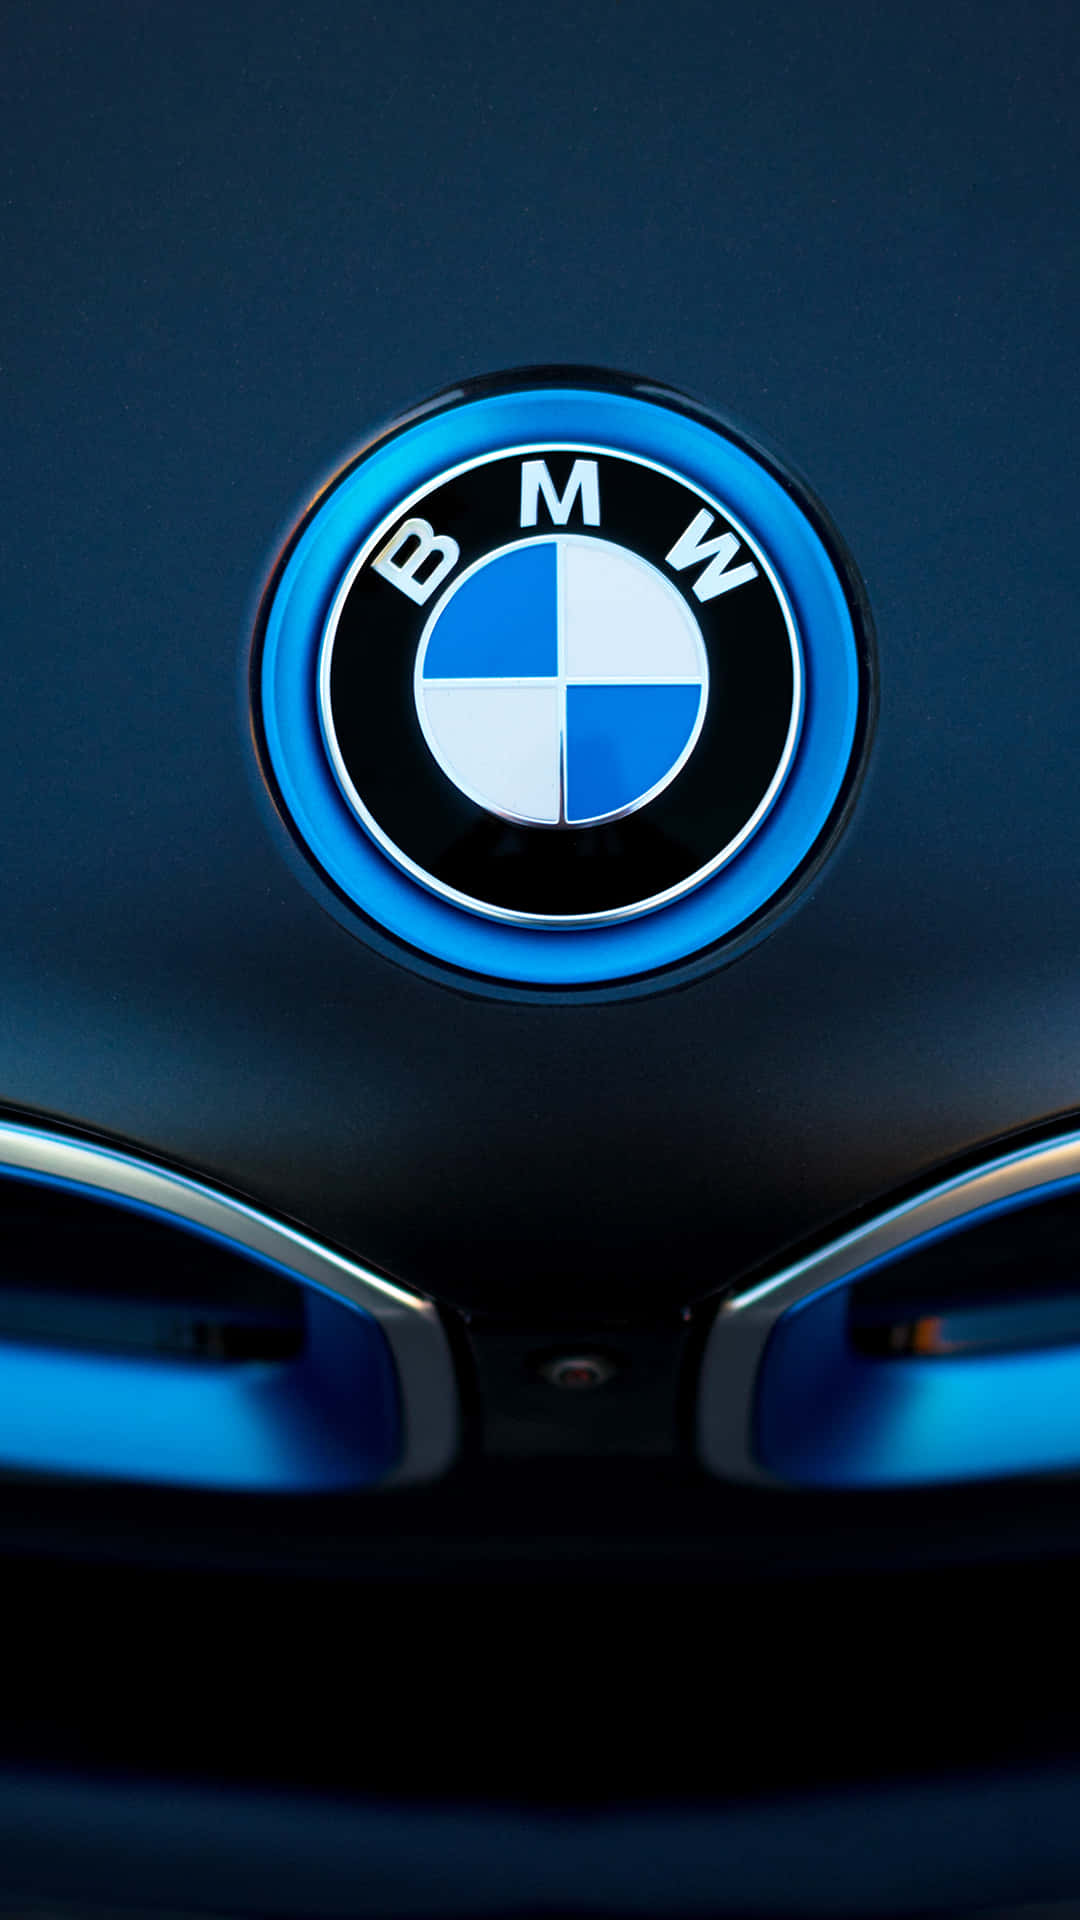 Bmw Cars Redesigned With Android System Background